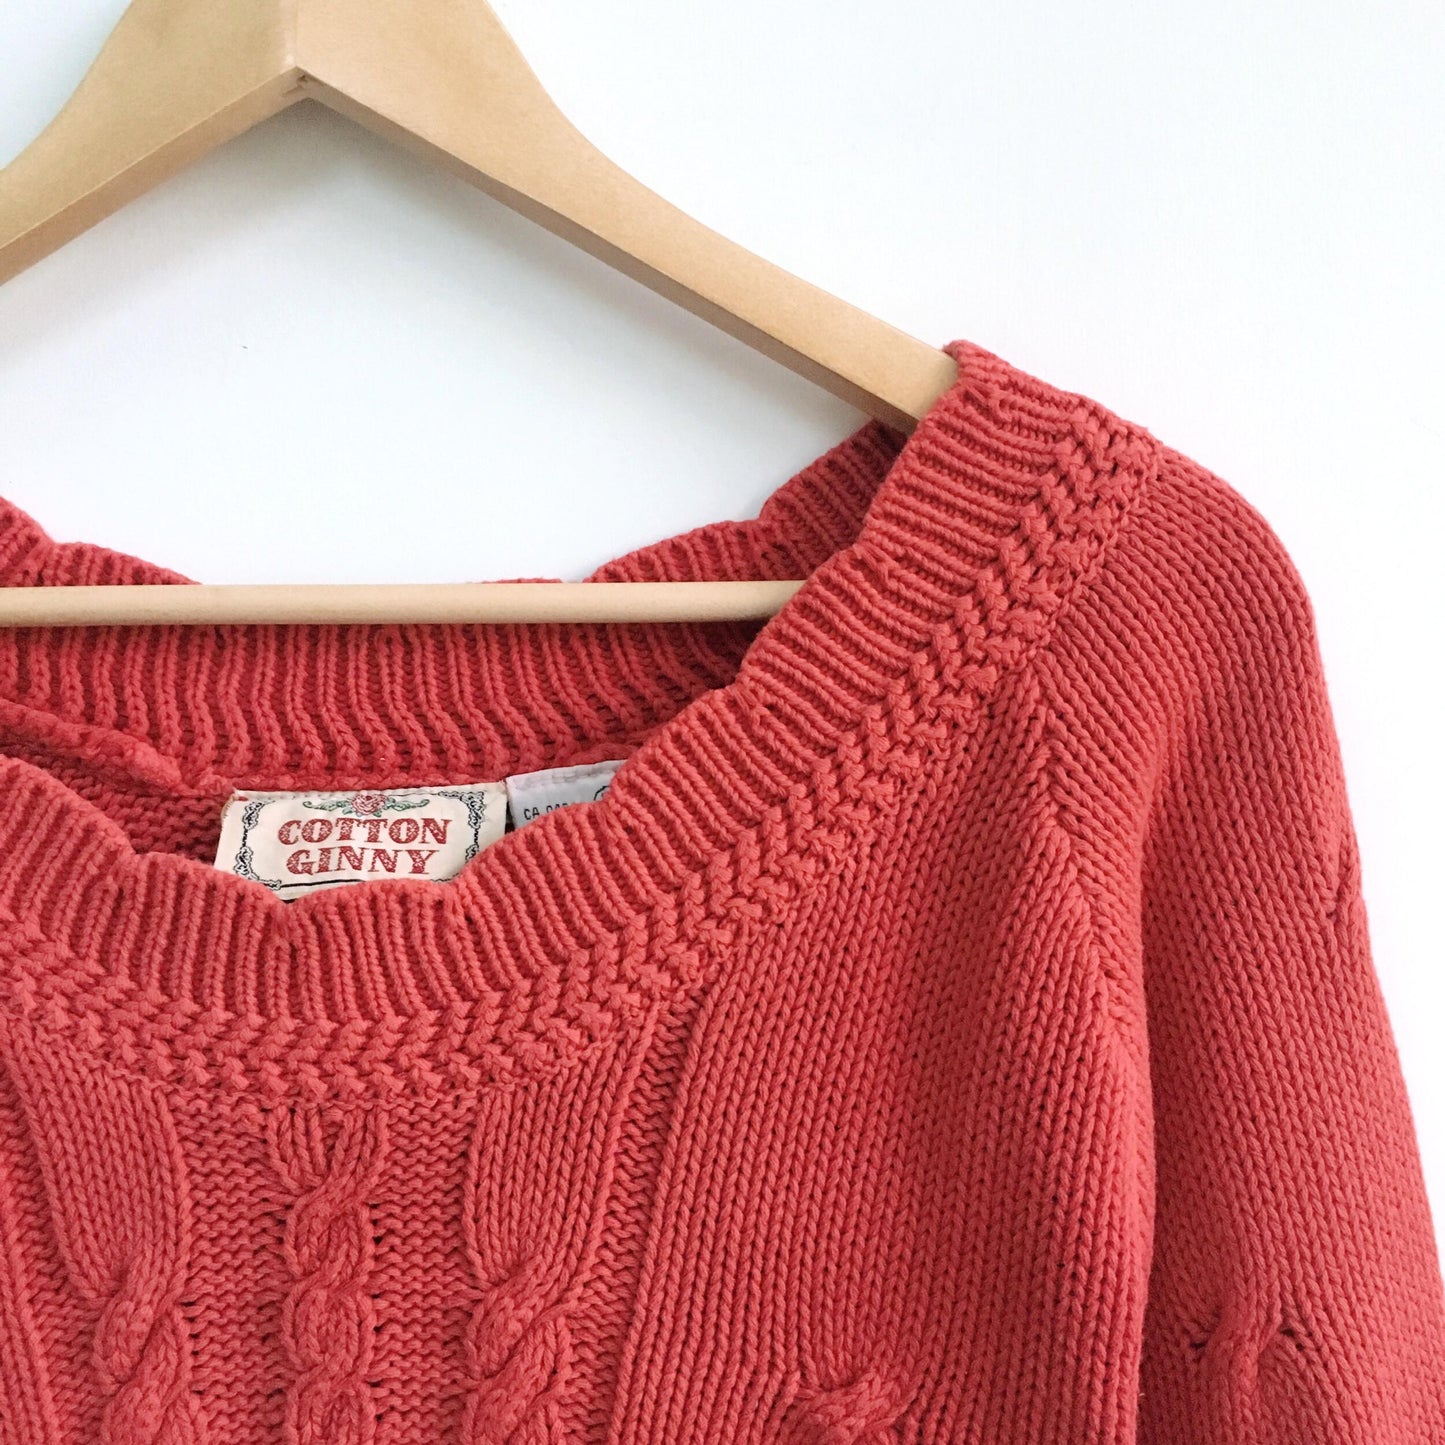 Vintage Cotton Ginny Cropped Sweater - size Small